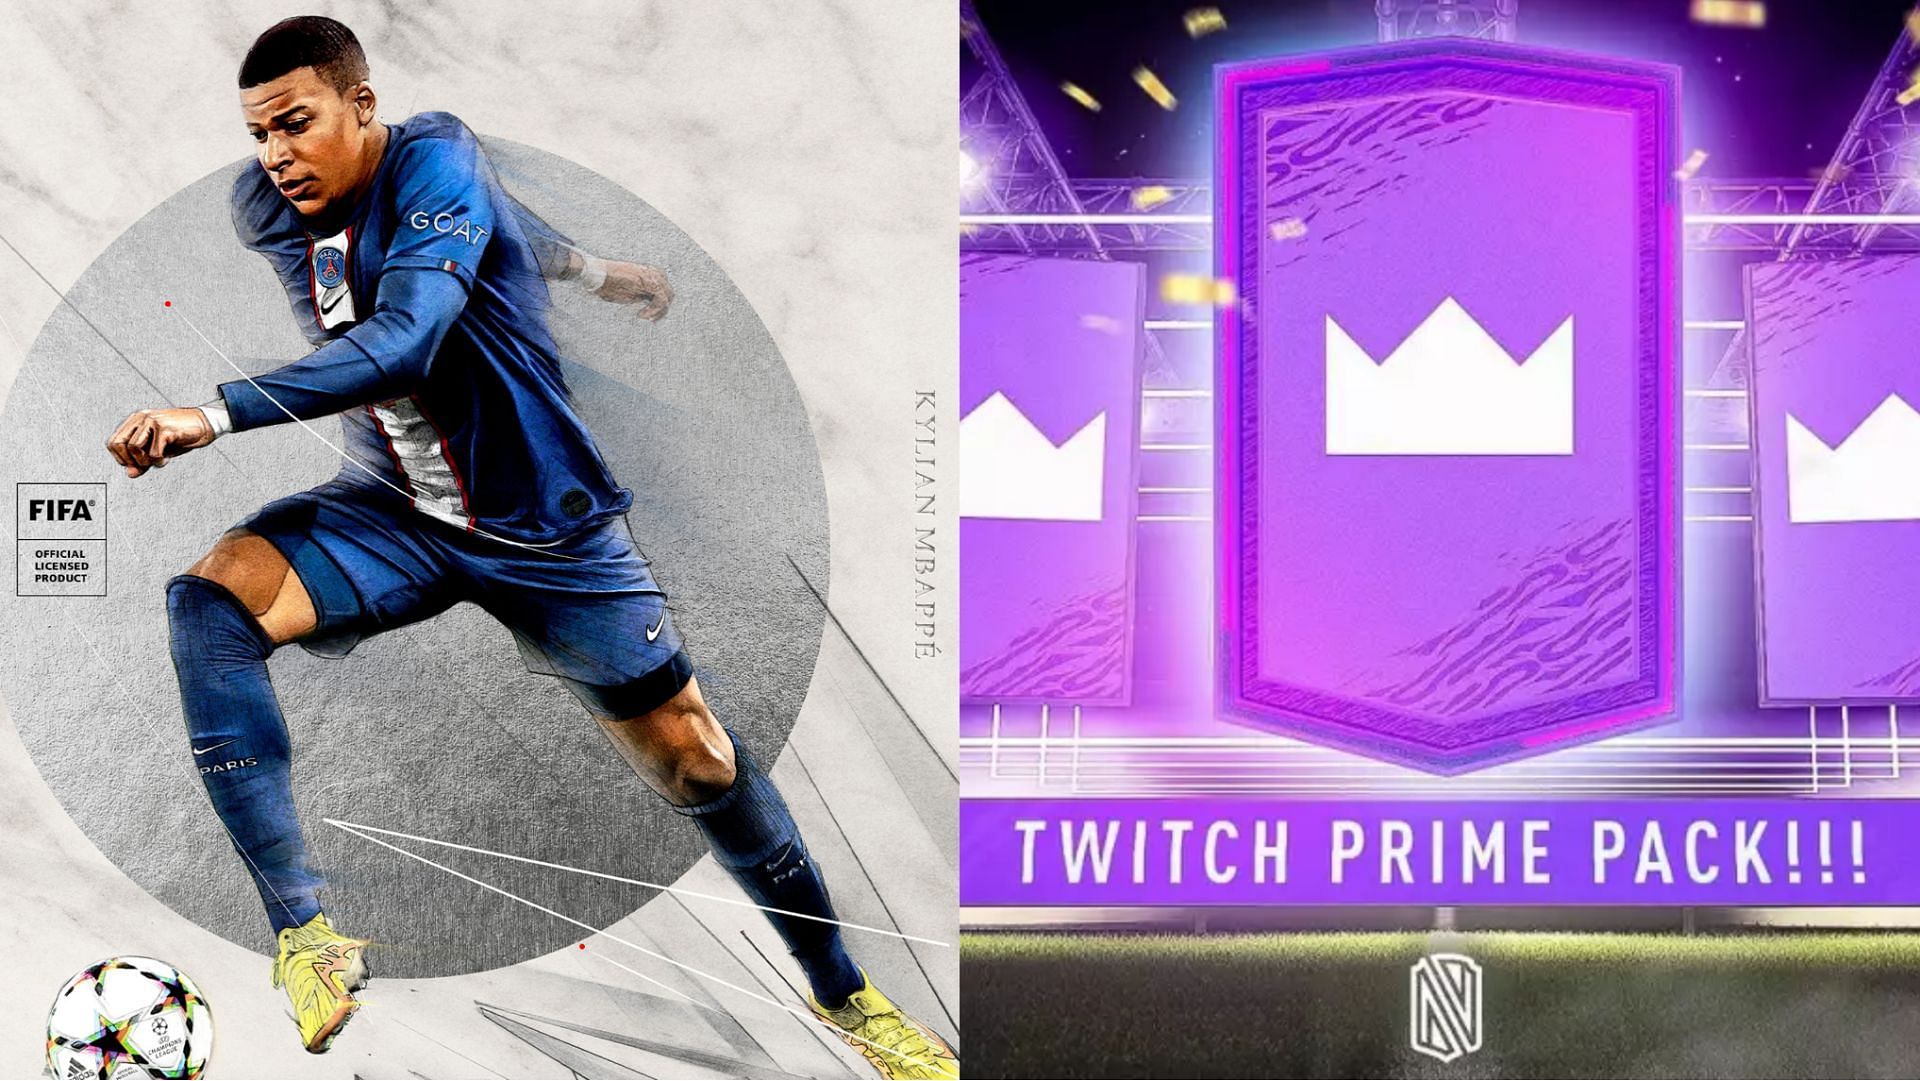 FIFAUTeam on X: The first Prime Gaming Rewards of #FIFA23 are out!    / X